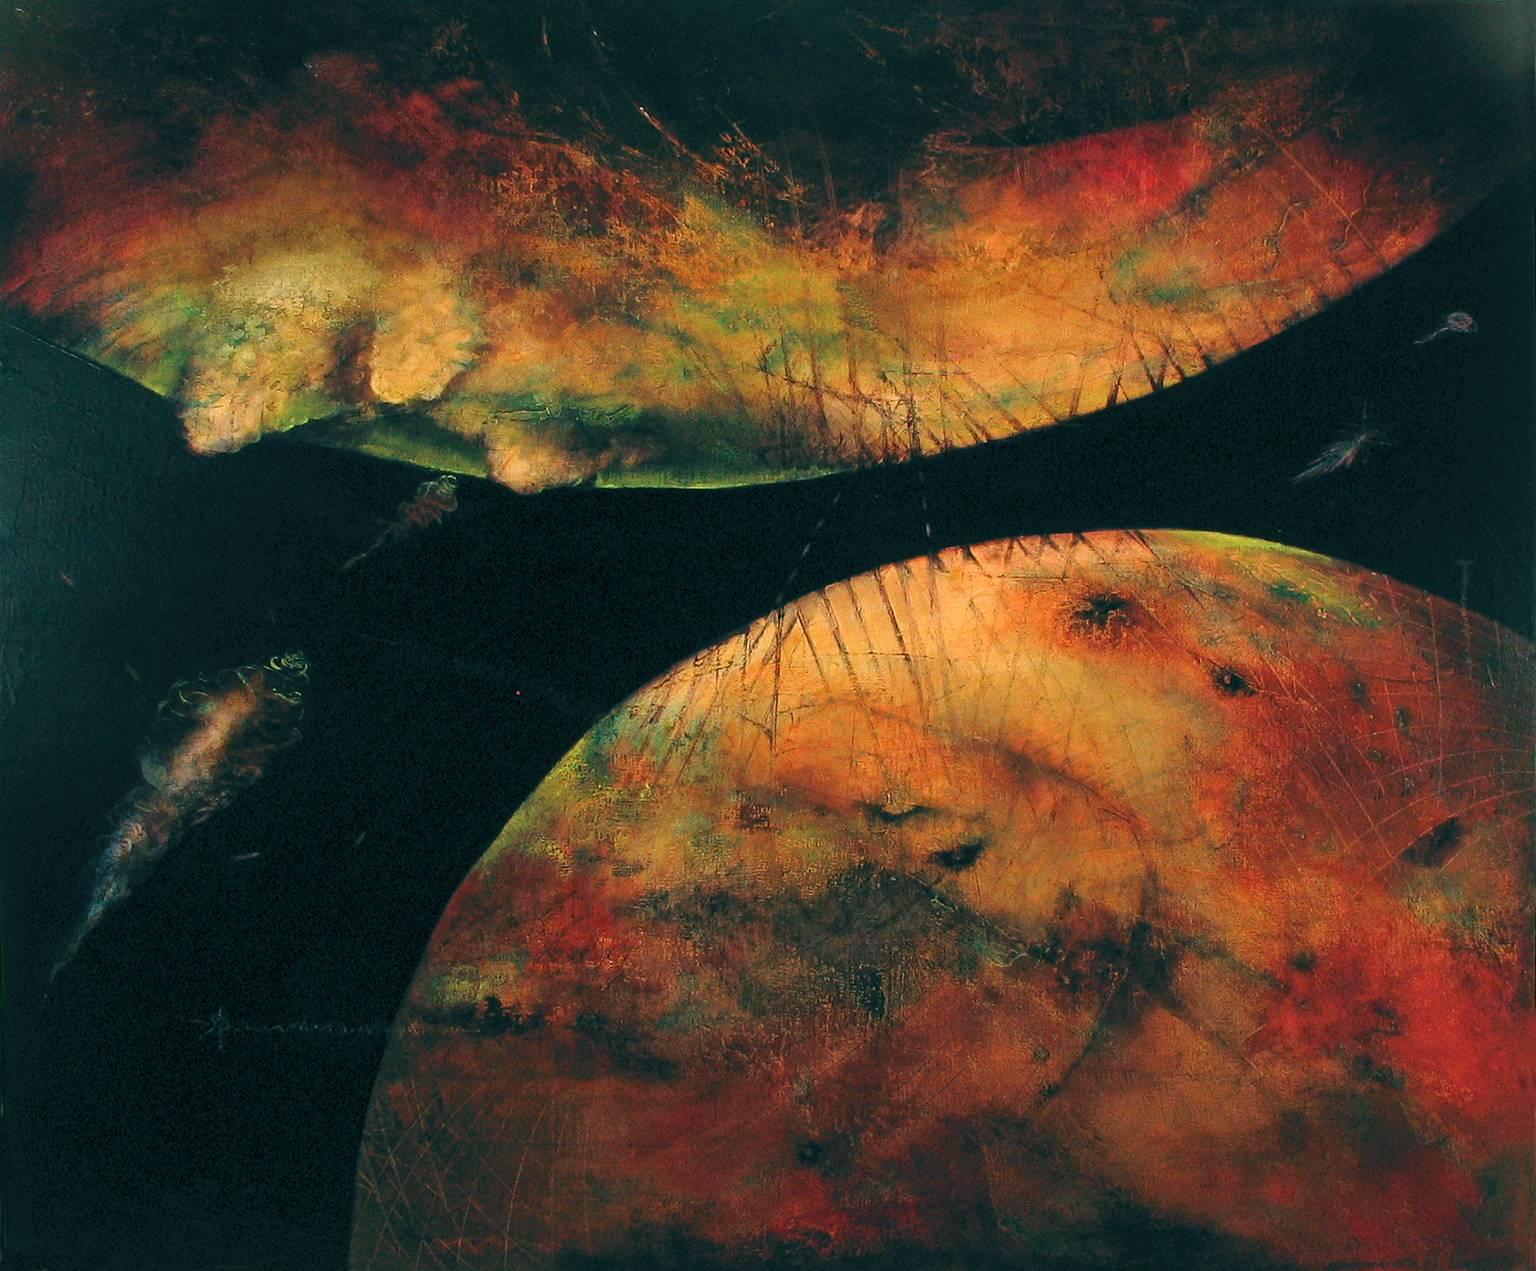 Kathleen Cammarata Abstract Painting - "Traveling Premonition" - Horizontal planet painting in dark and autumn colors.